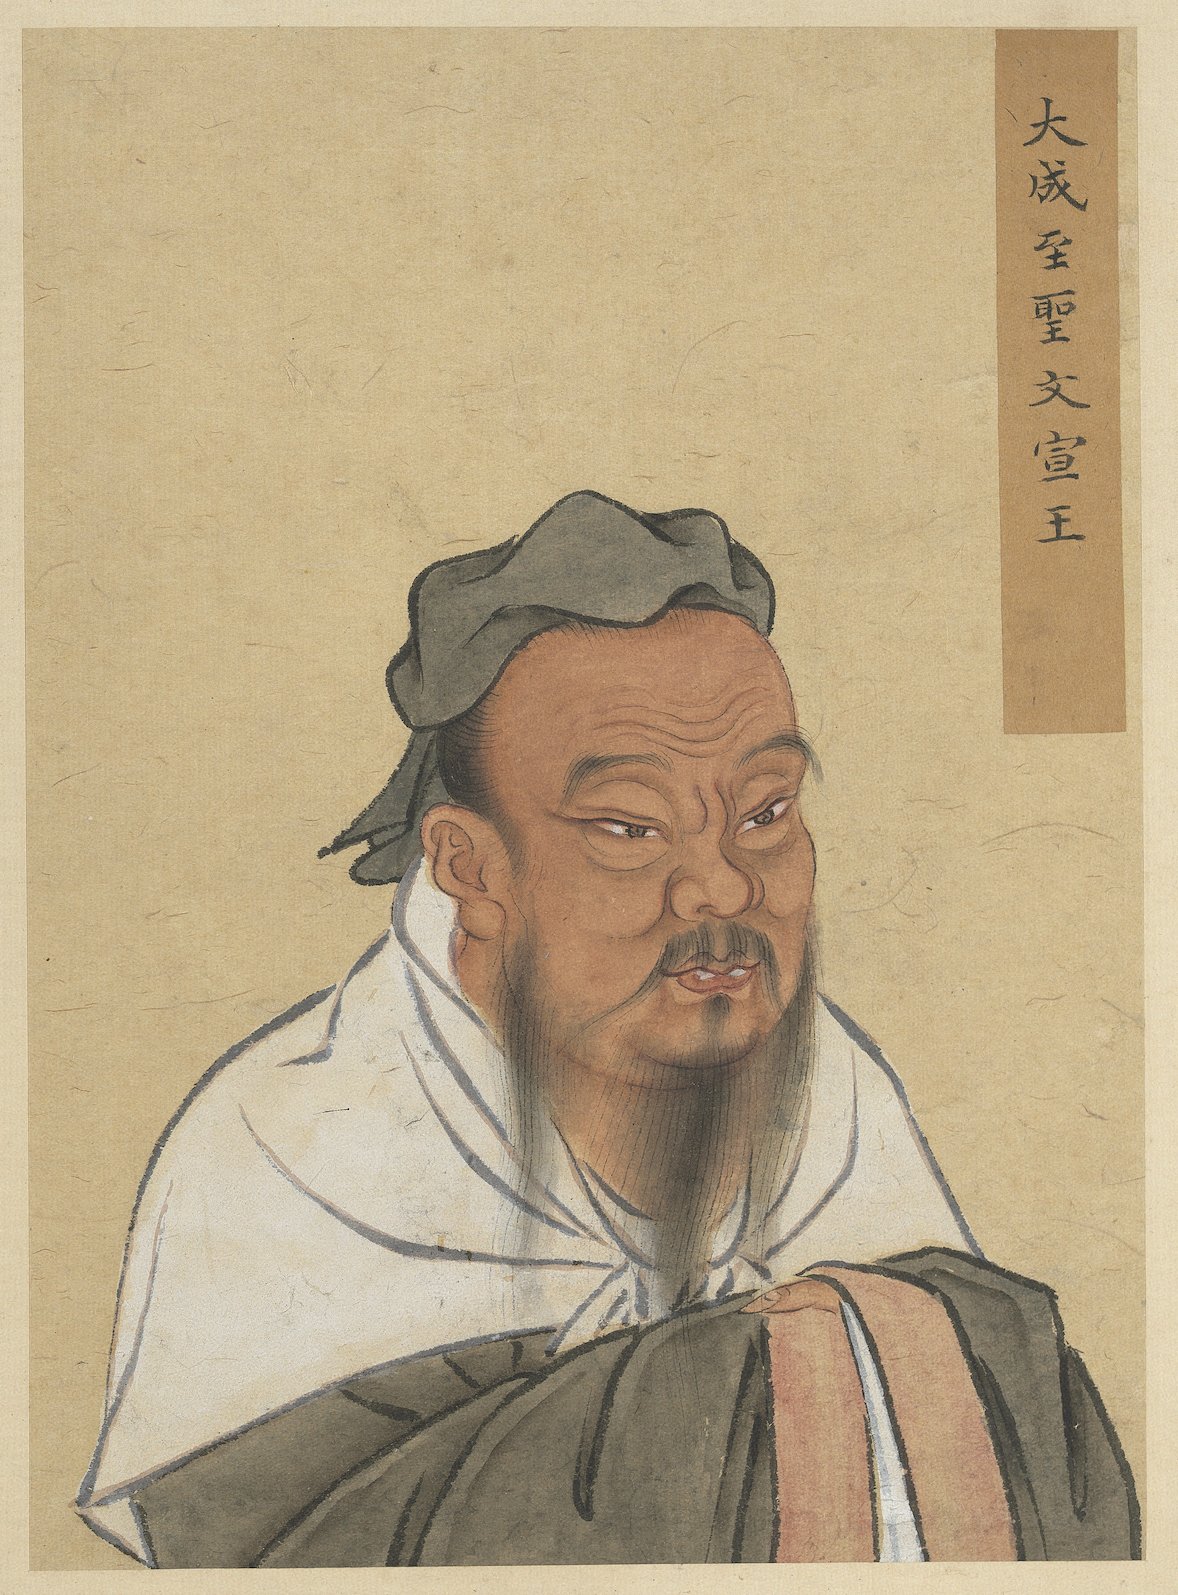 Half_Portraits_of_the_Great_Sage_and_Virtuous_Men_of_Old_-_Confucius.jpg